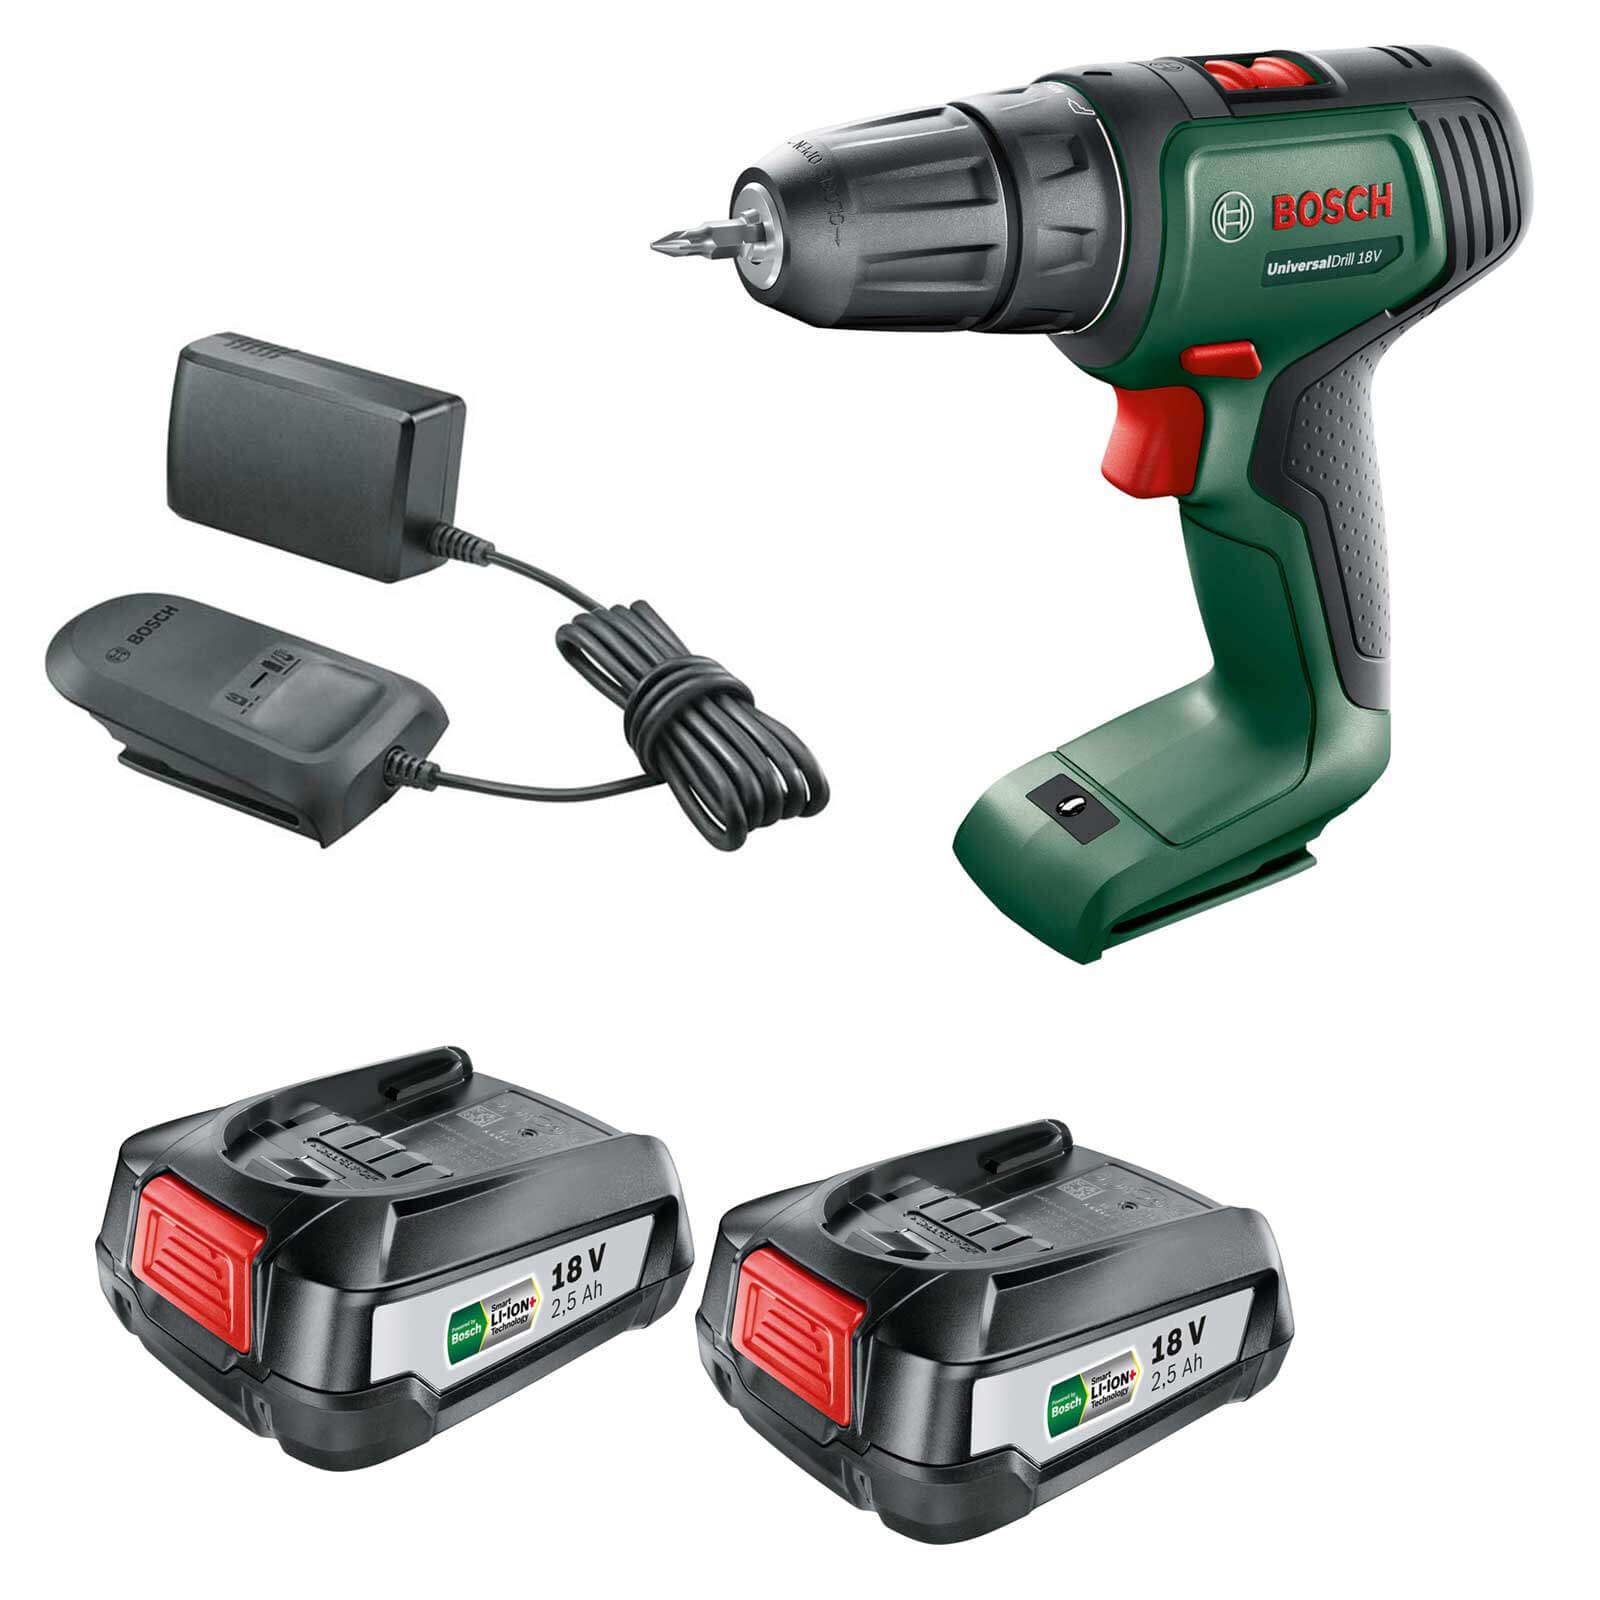 Image of Bosch UNIVERSALDRILL 18v Cordless Drill Driver 2 x 2.5ah Li-ion Charger No Case